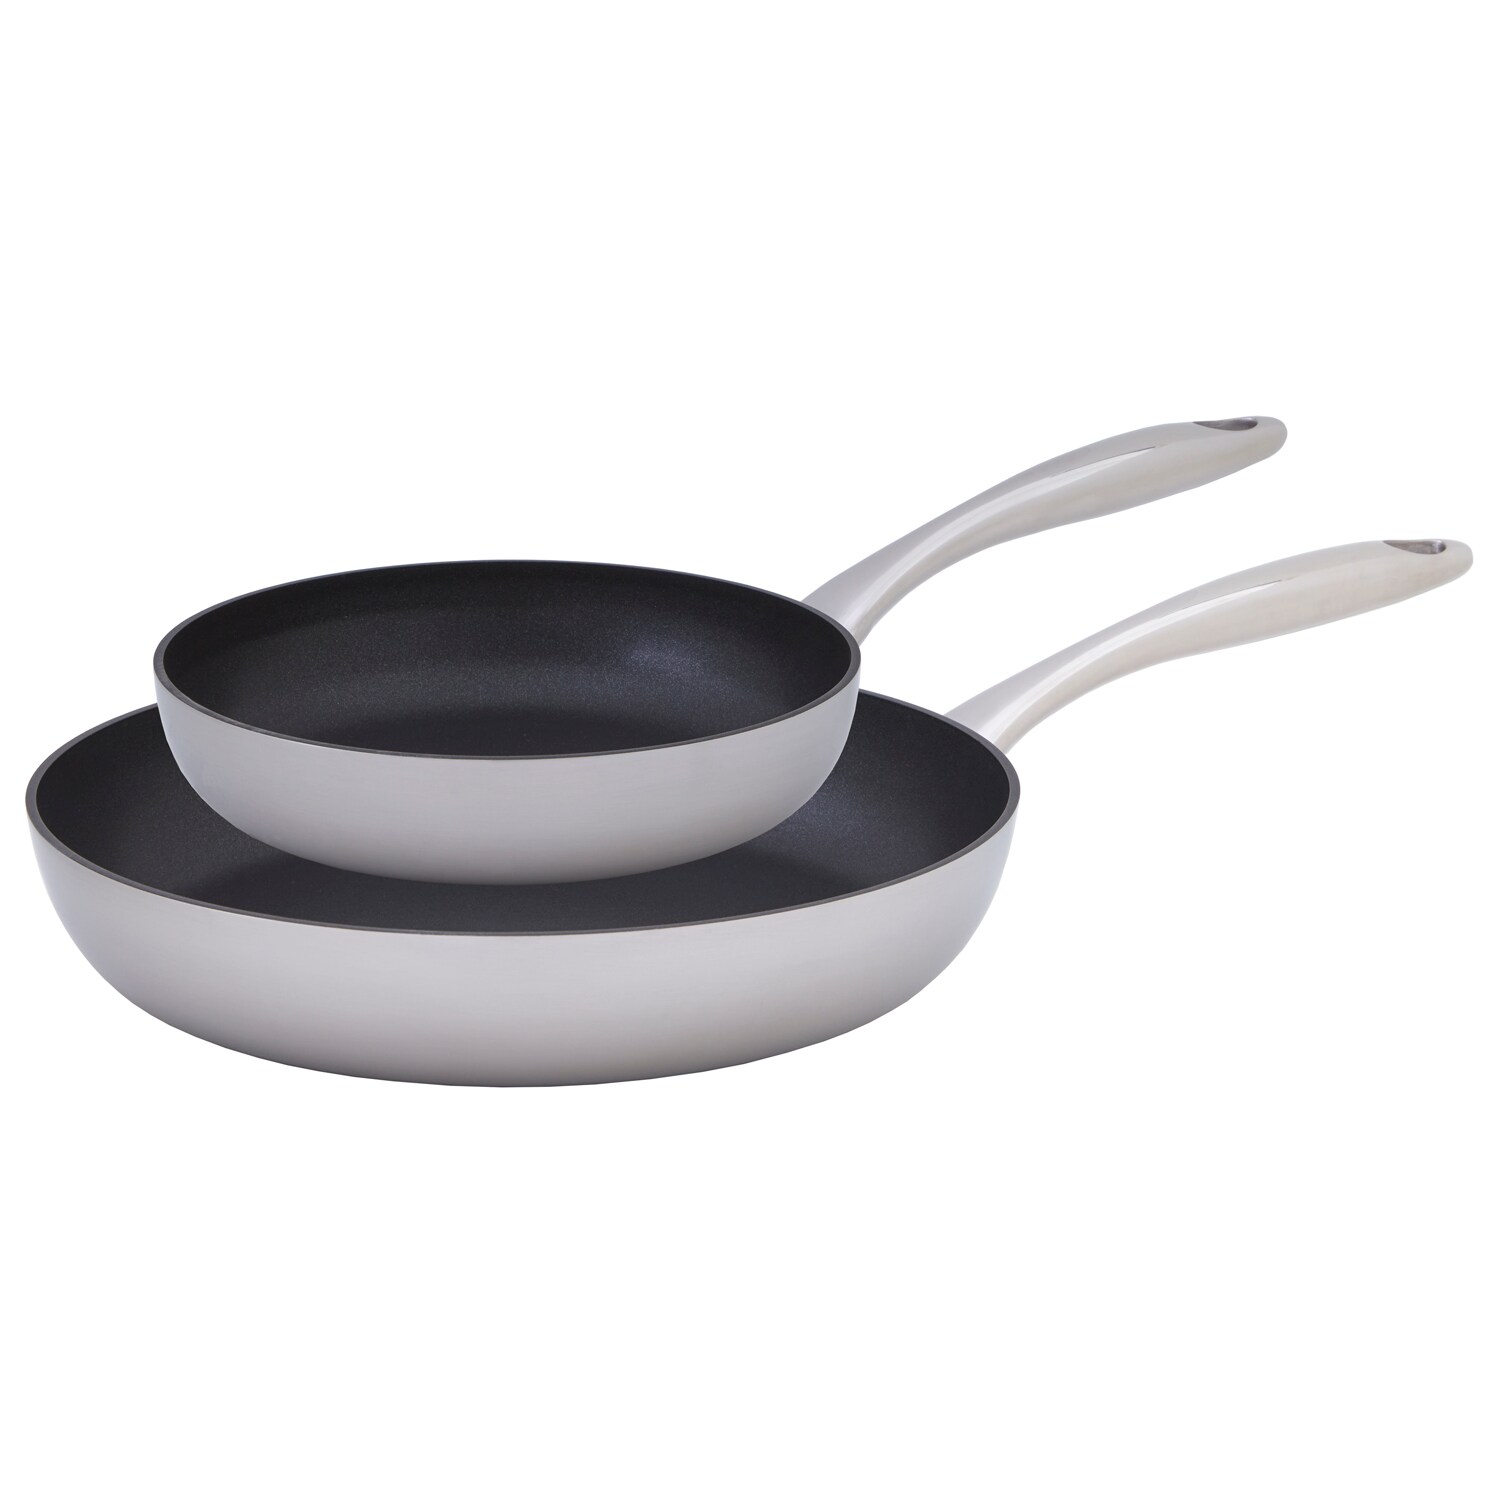 s best nonstick frying pan has 30,000 5-star reviews for